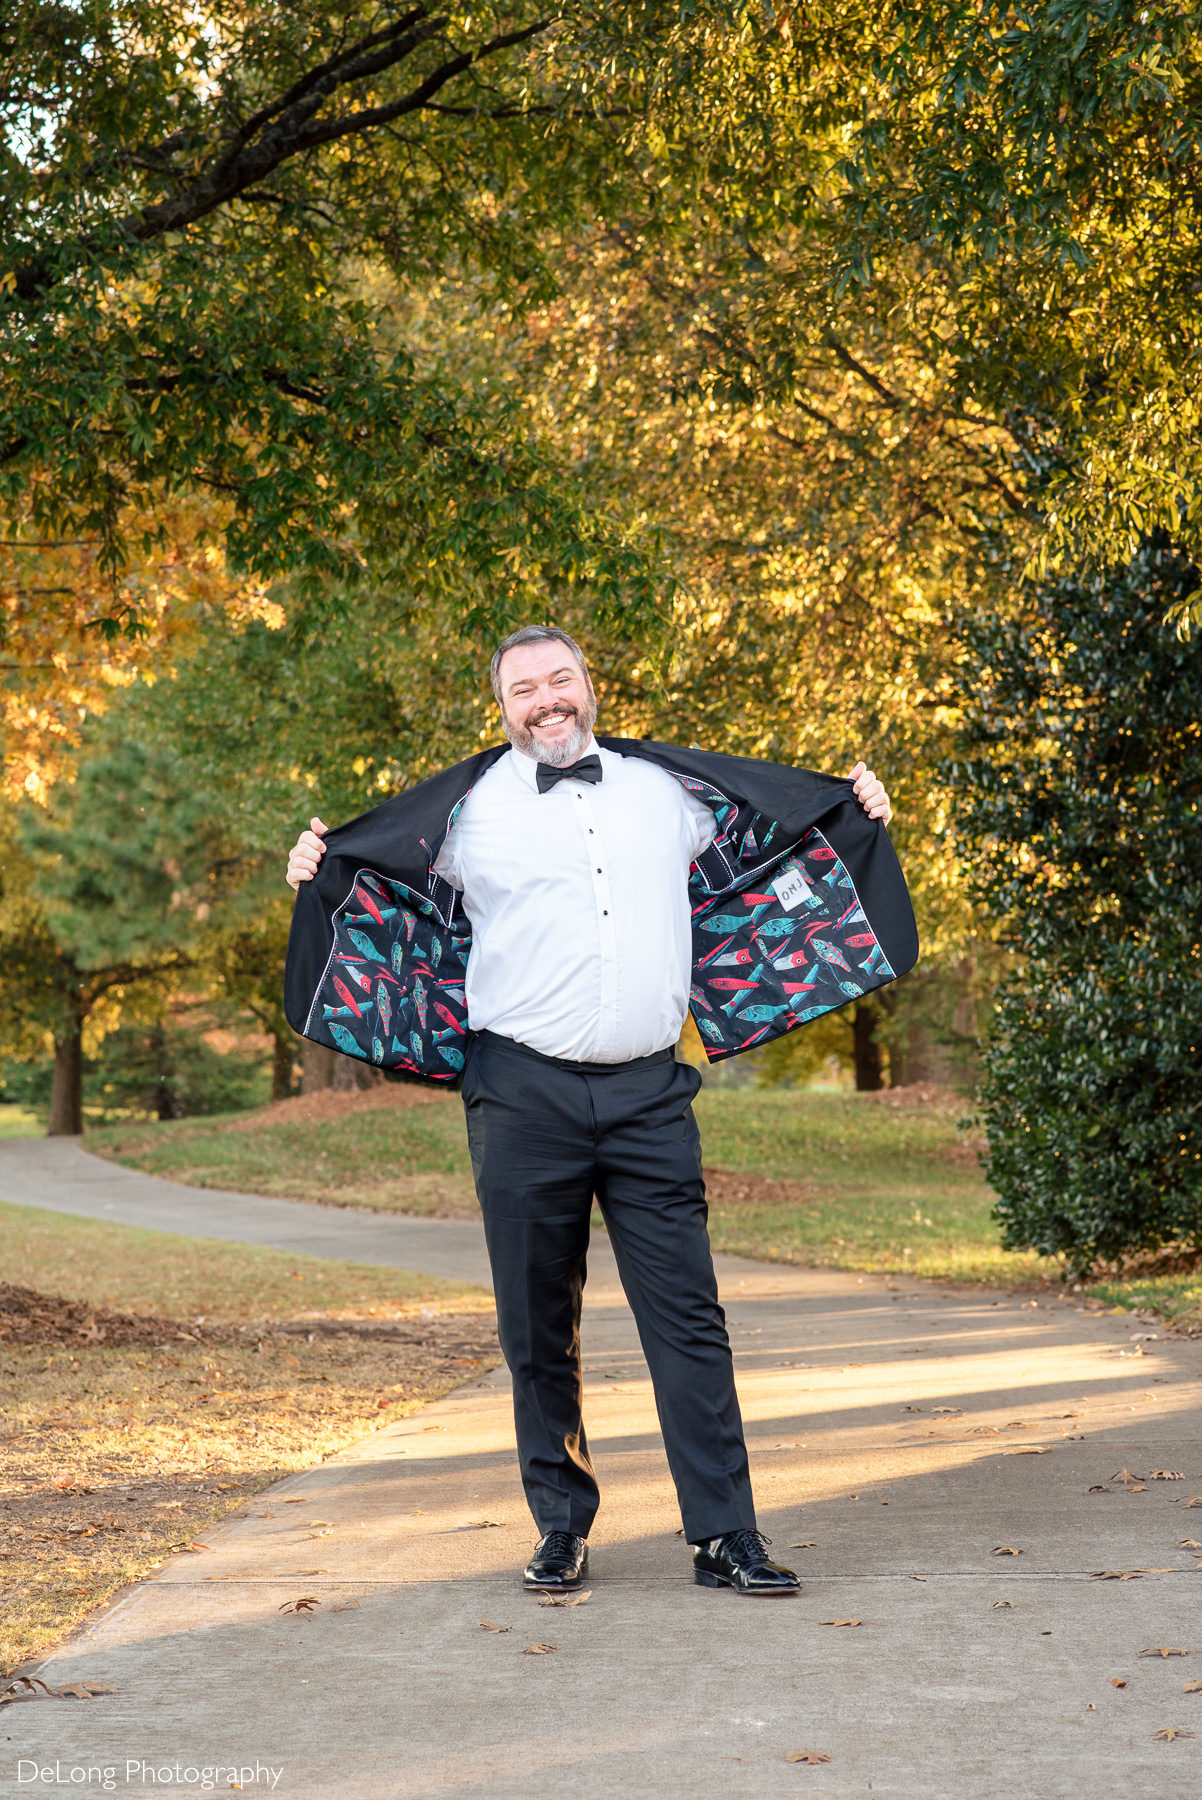 Groom showing off his custom suit jacket with fishing lures as the design by Charlotte Wedding Photographers DeLong Photography